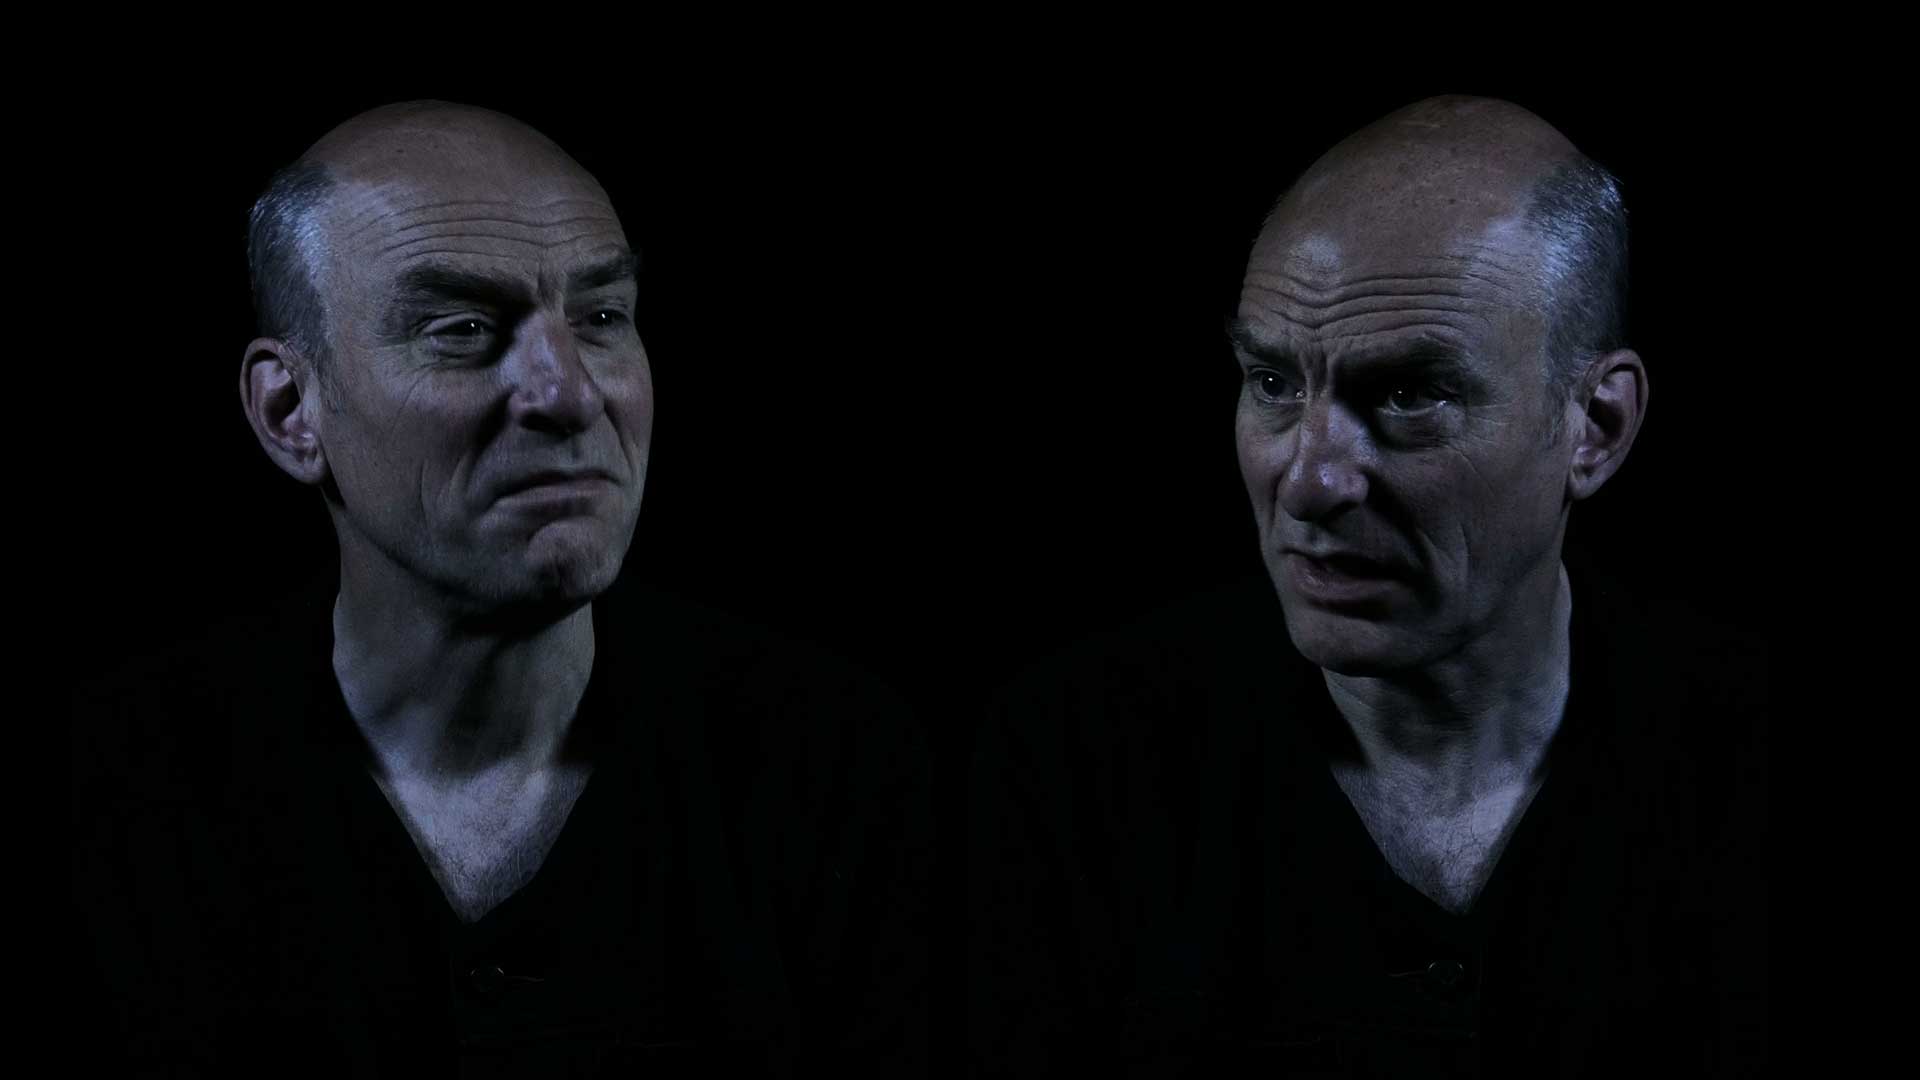 Still of Mirror I by David Cotterrell - An image of a man is displayed on a screen, twice with different expressions.